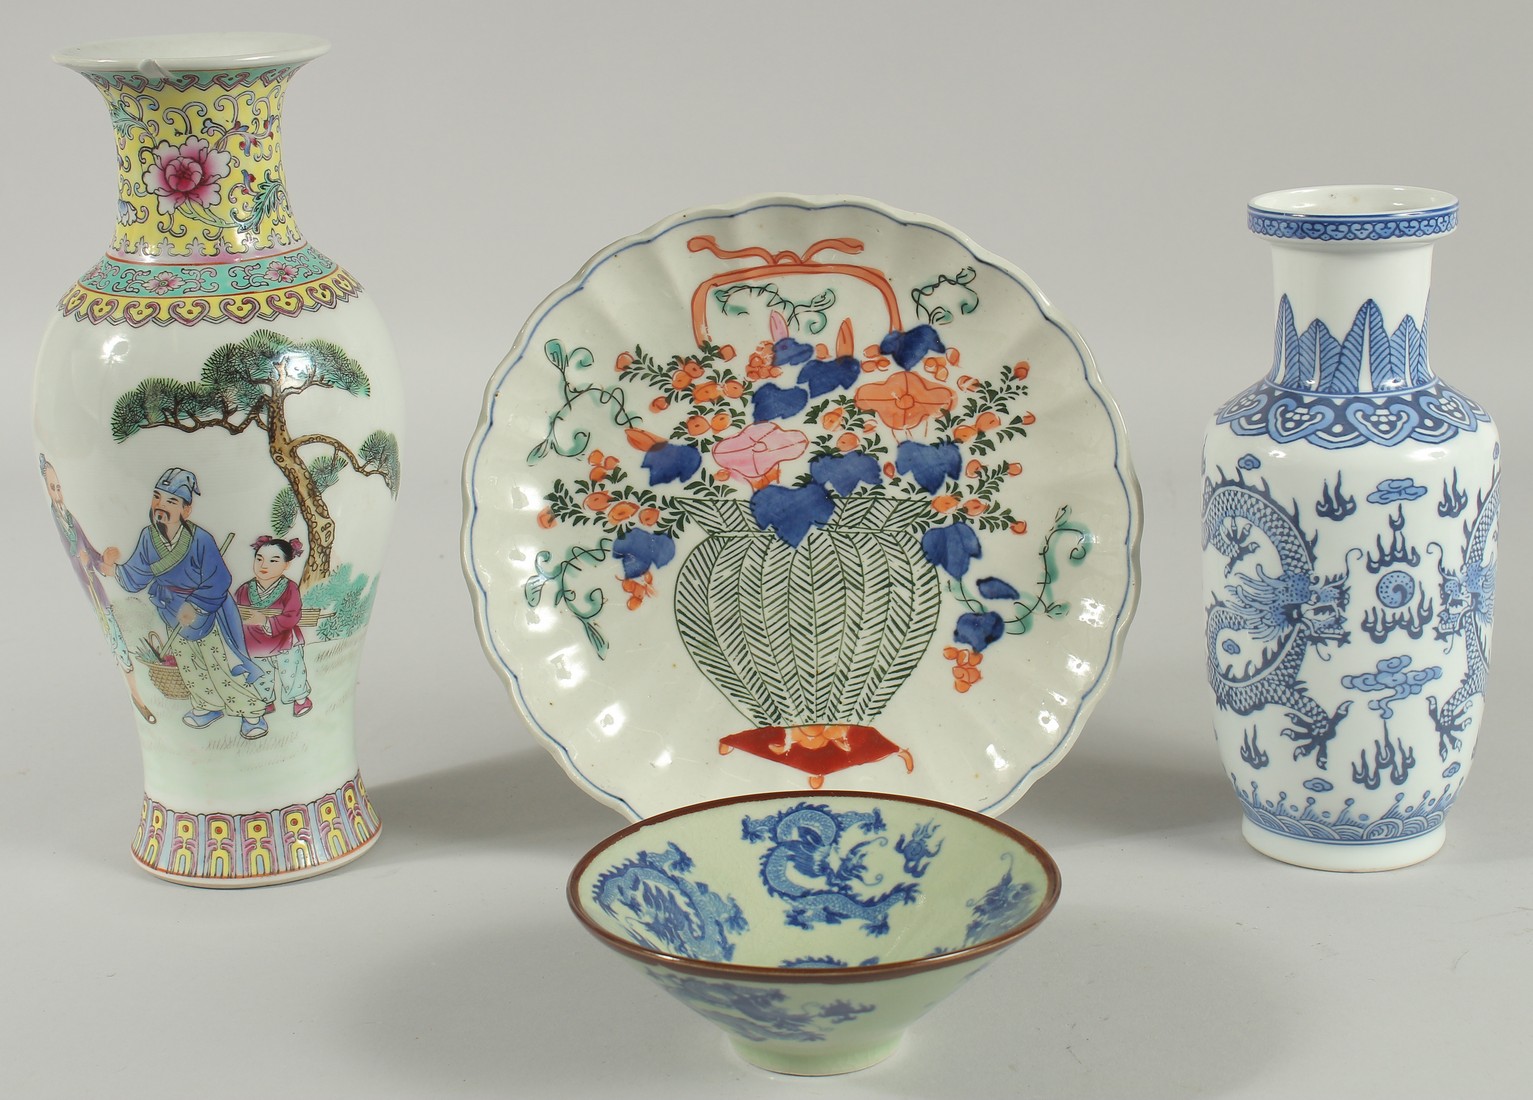 FOUR ORIENTAL PORCELAIN ITEMS; including a famille rose vase, and Imari-type dish, a small celadon